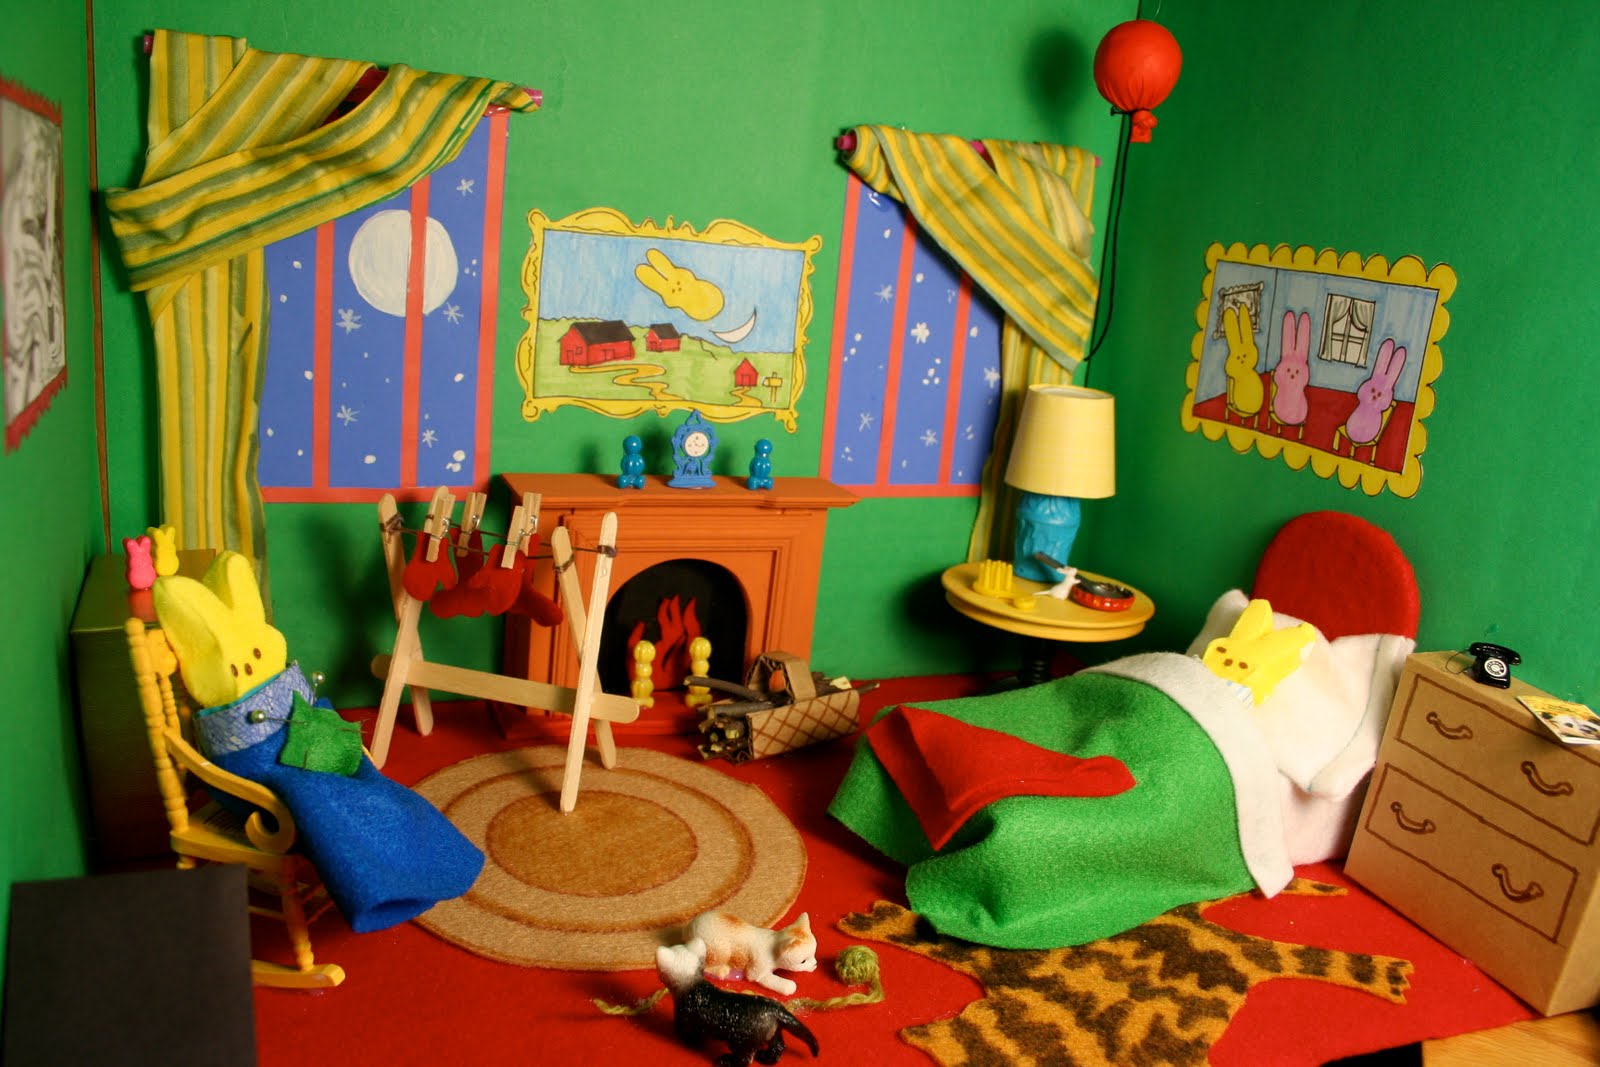 diorama that looks like the cover of the book goodnight moon